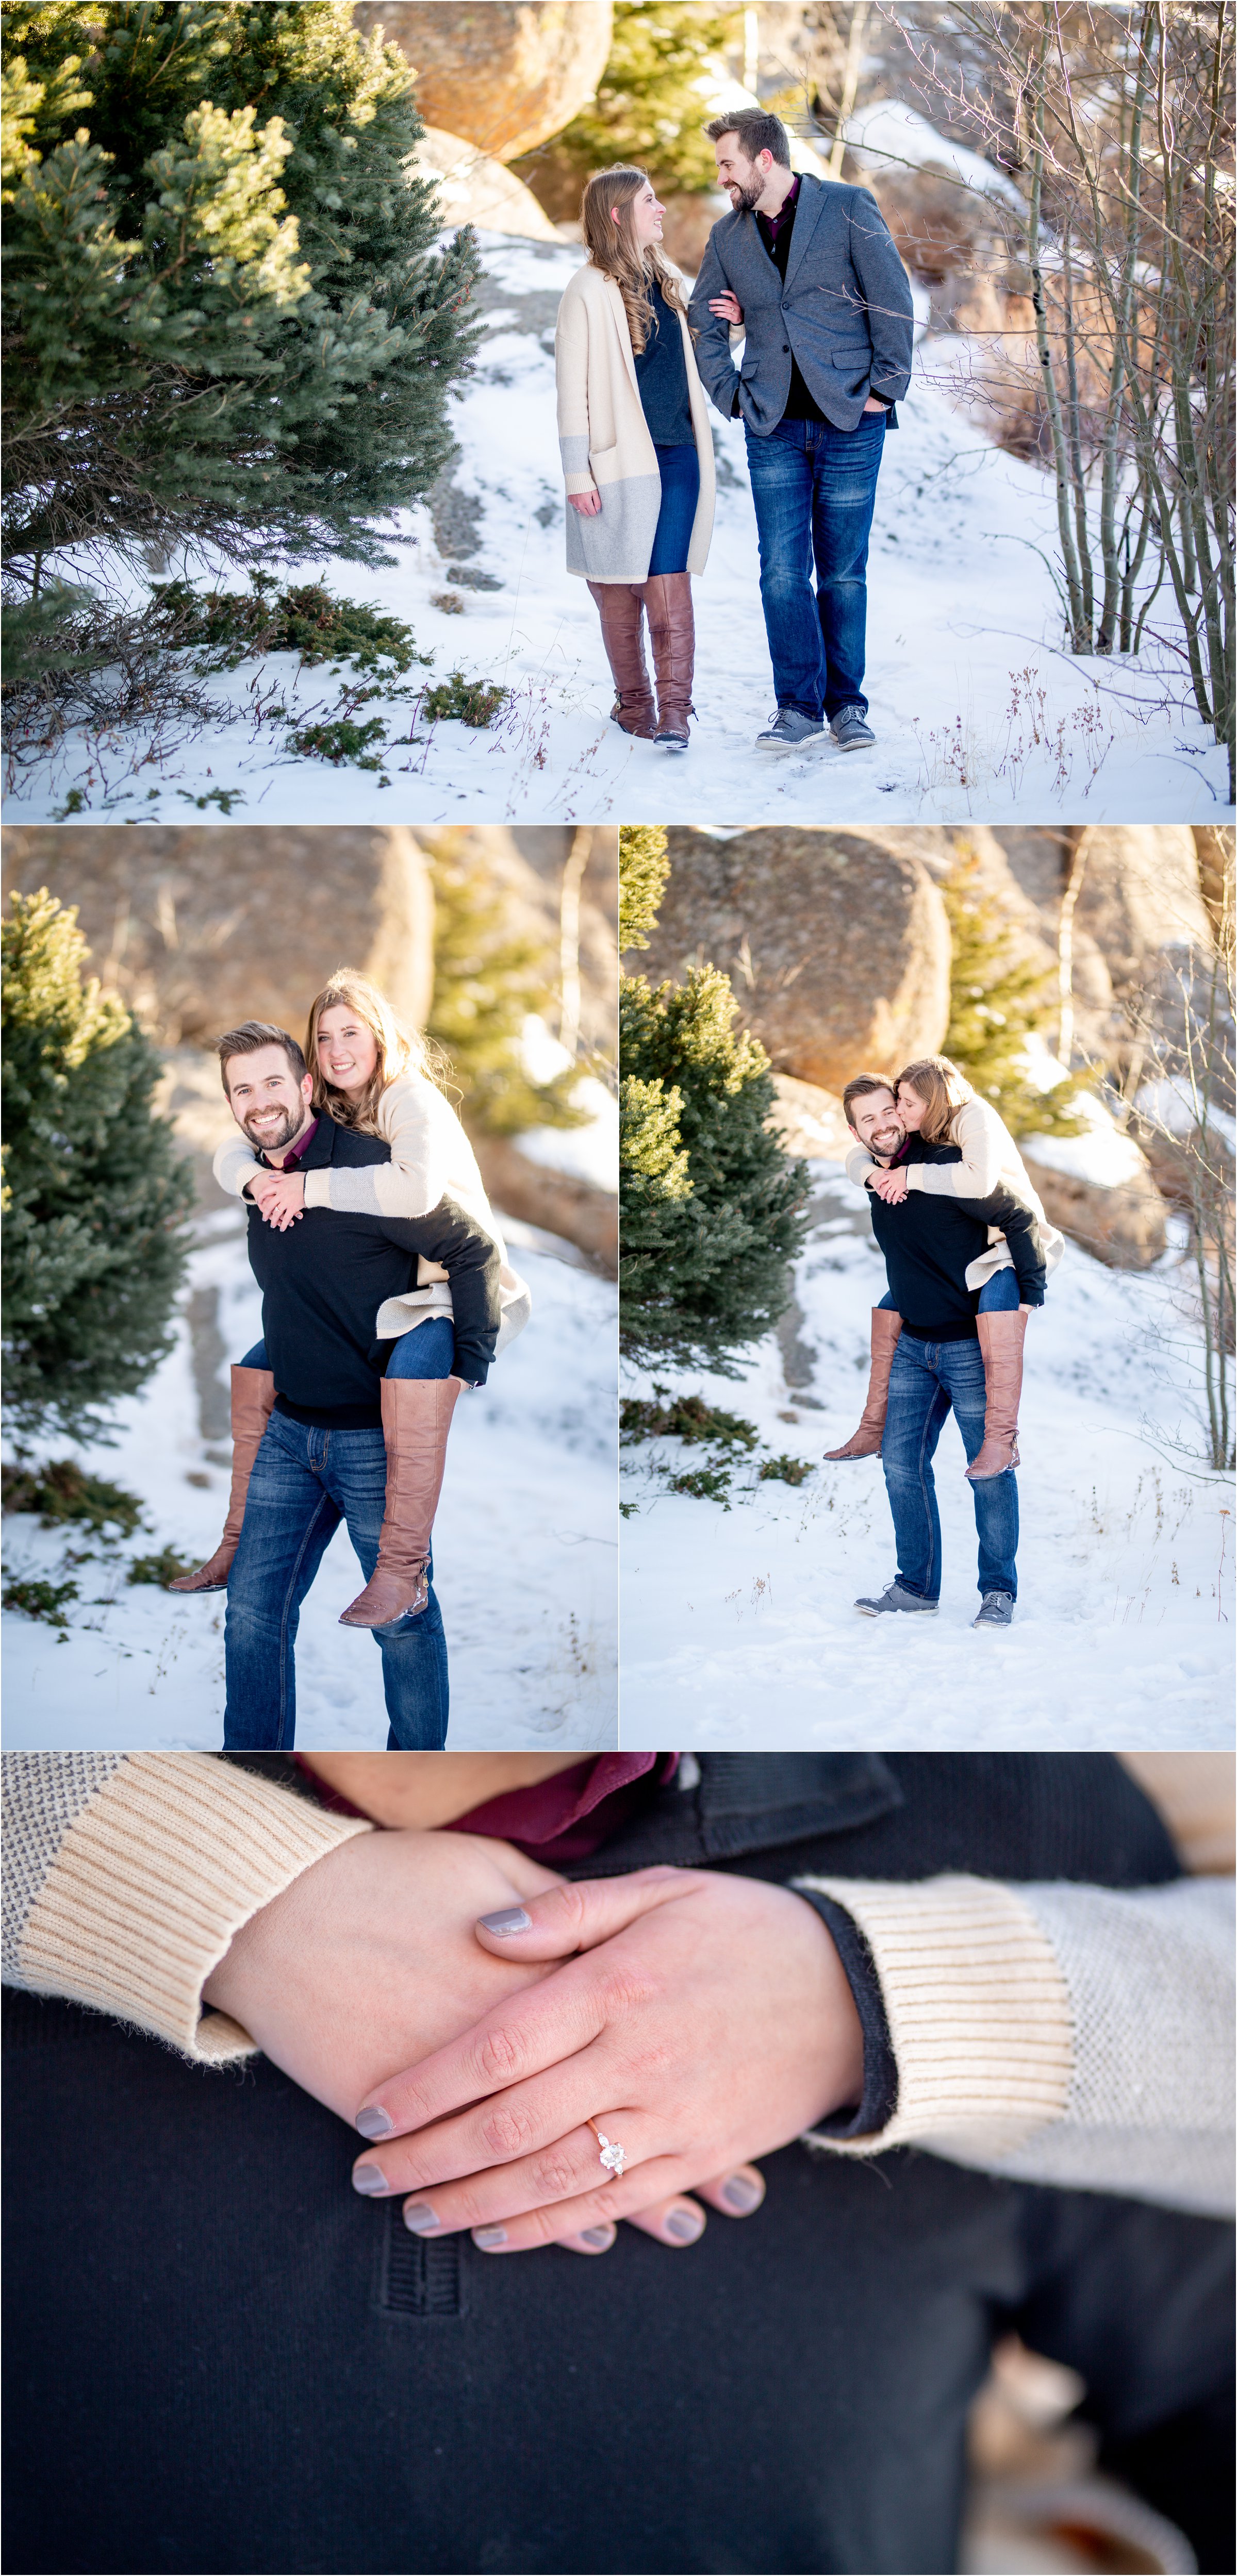 engaged bride and groom in different poses in the snow with rocks and trees in background